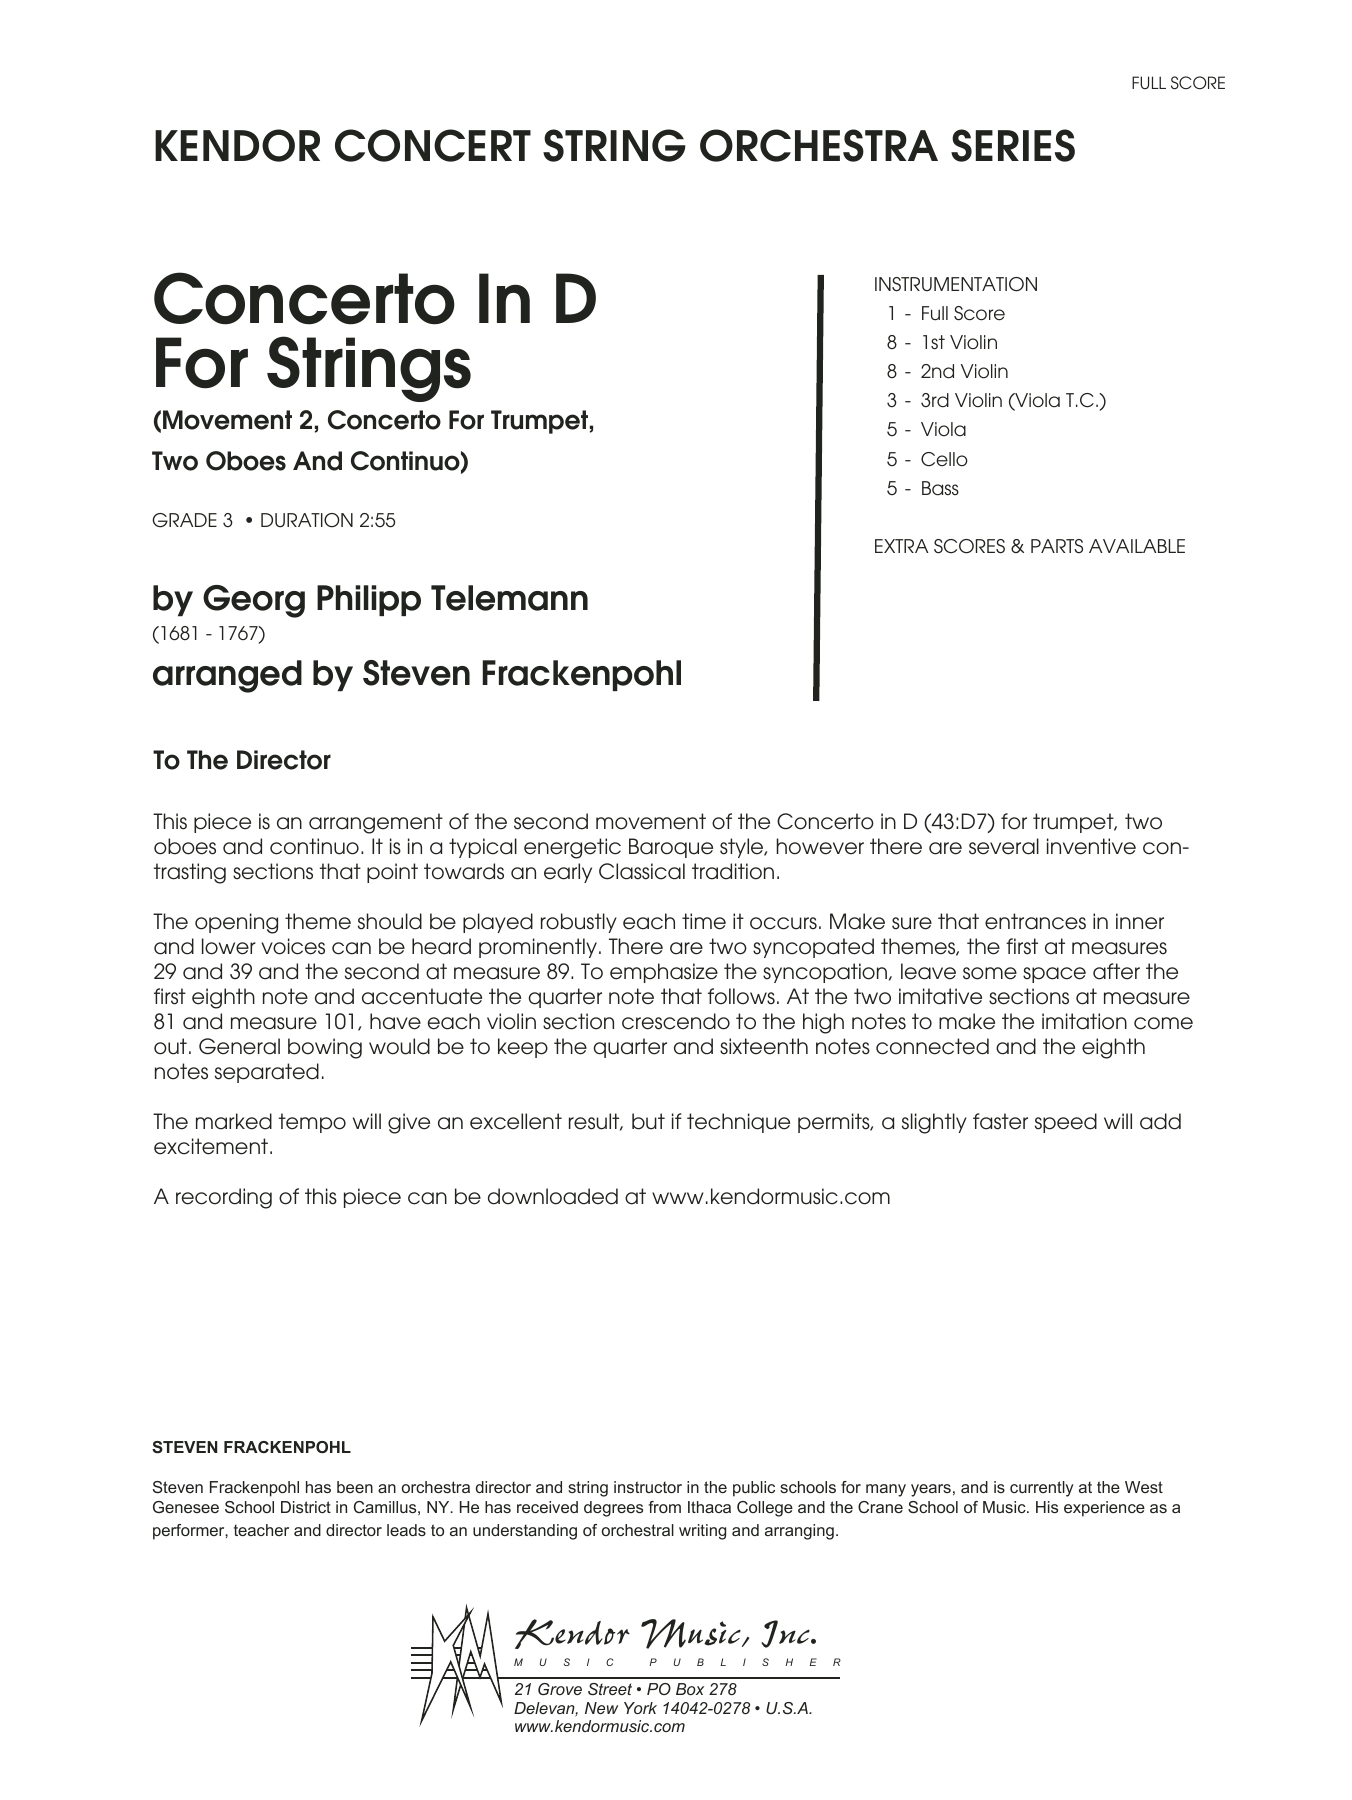 Concerto In D For Strings (Mov II Concerto For Trumpet, 2 Oboes & Continuo) - Full Score (Orchestra) von Steve Frackenpohl